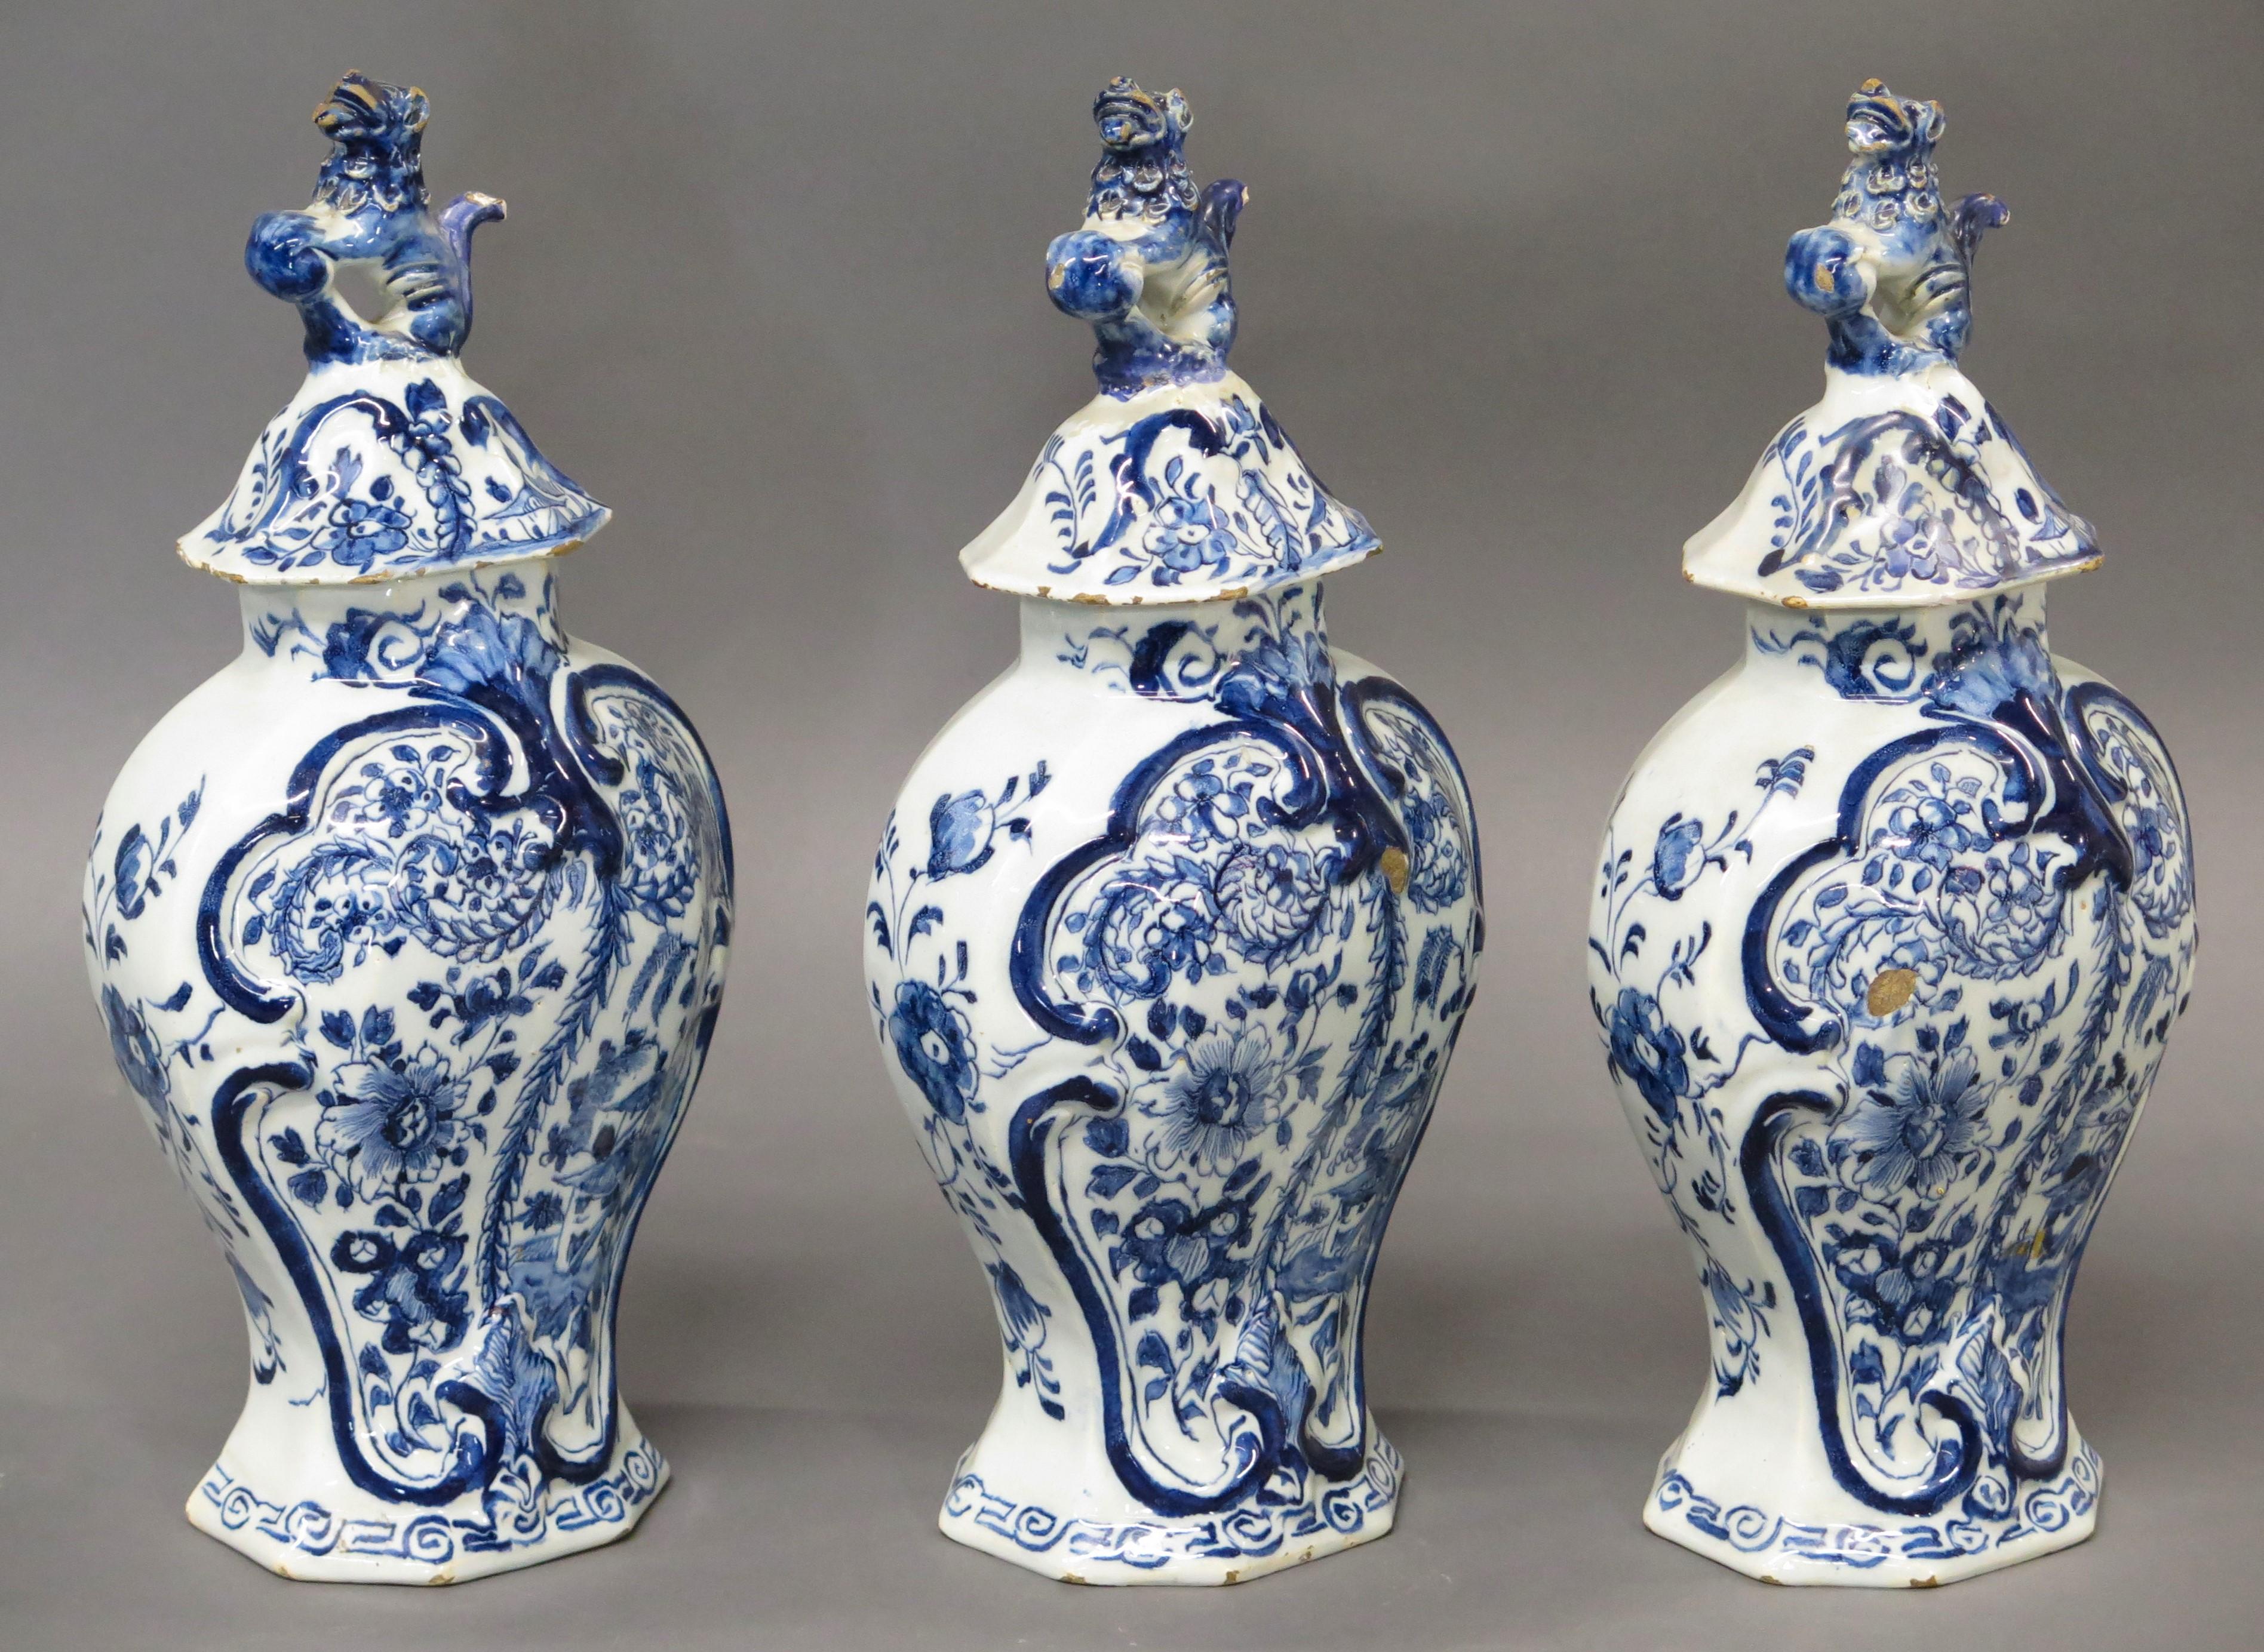 18th Century Dutch delft 3-piece garniture lidded vase set, blue and white with floral panel and relief foliate decorations, with foo dog finials, each vase marked LPK on the base for the 